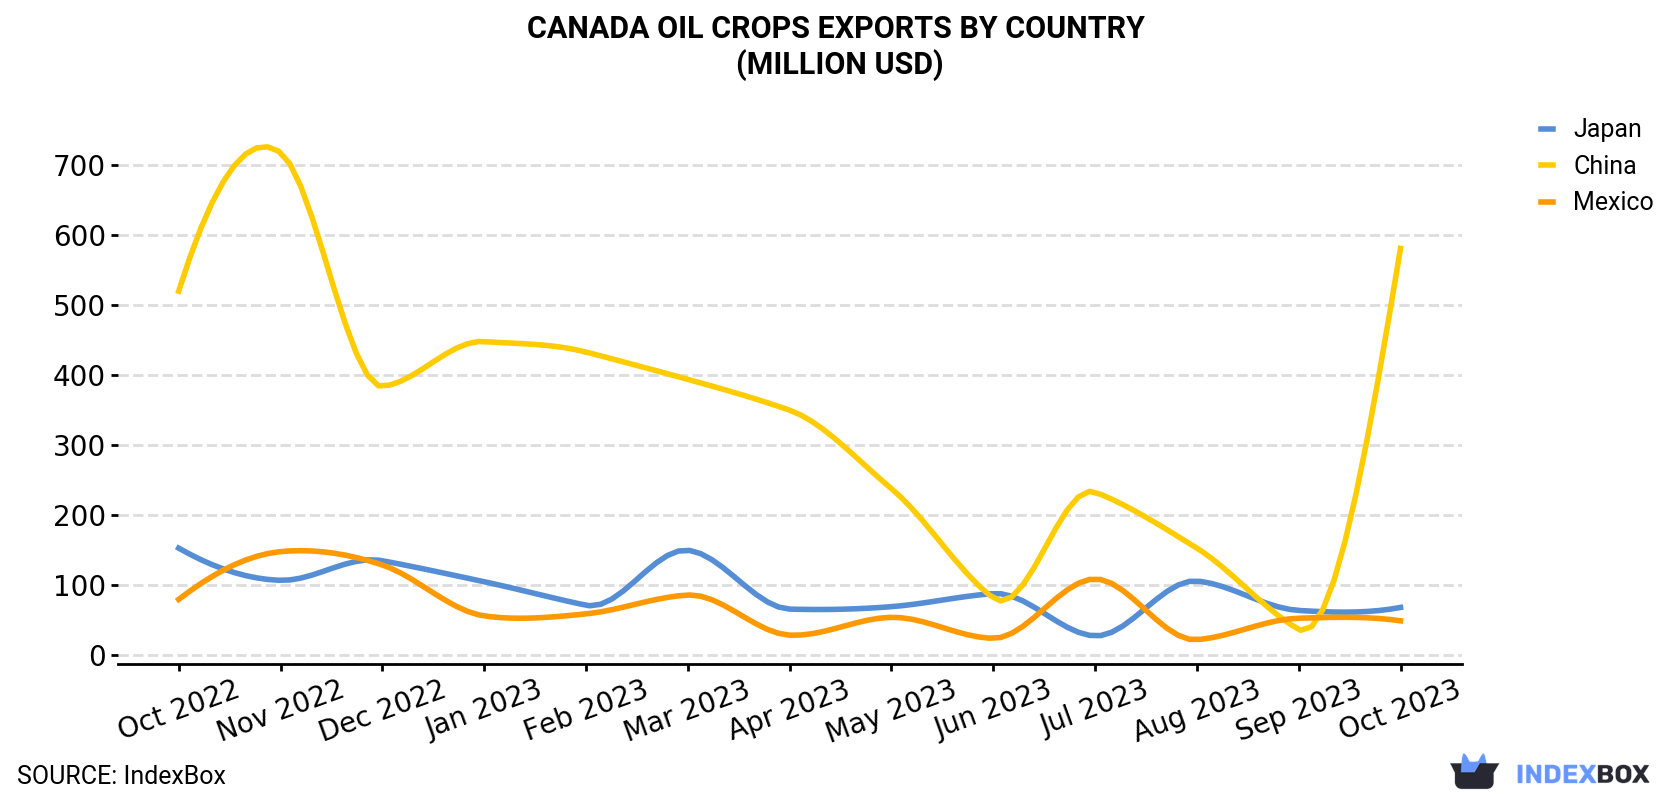 Canada Oil Crops Exports By Country (Million USD)